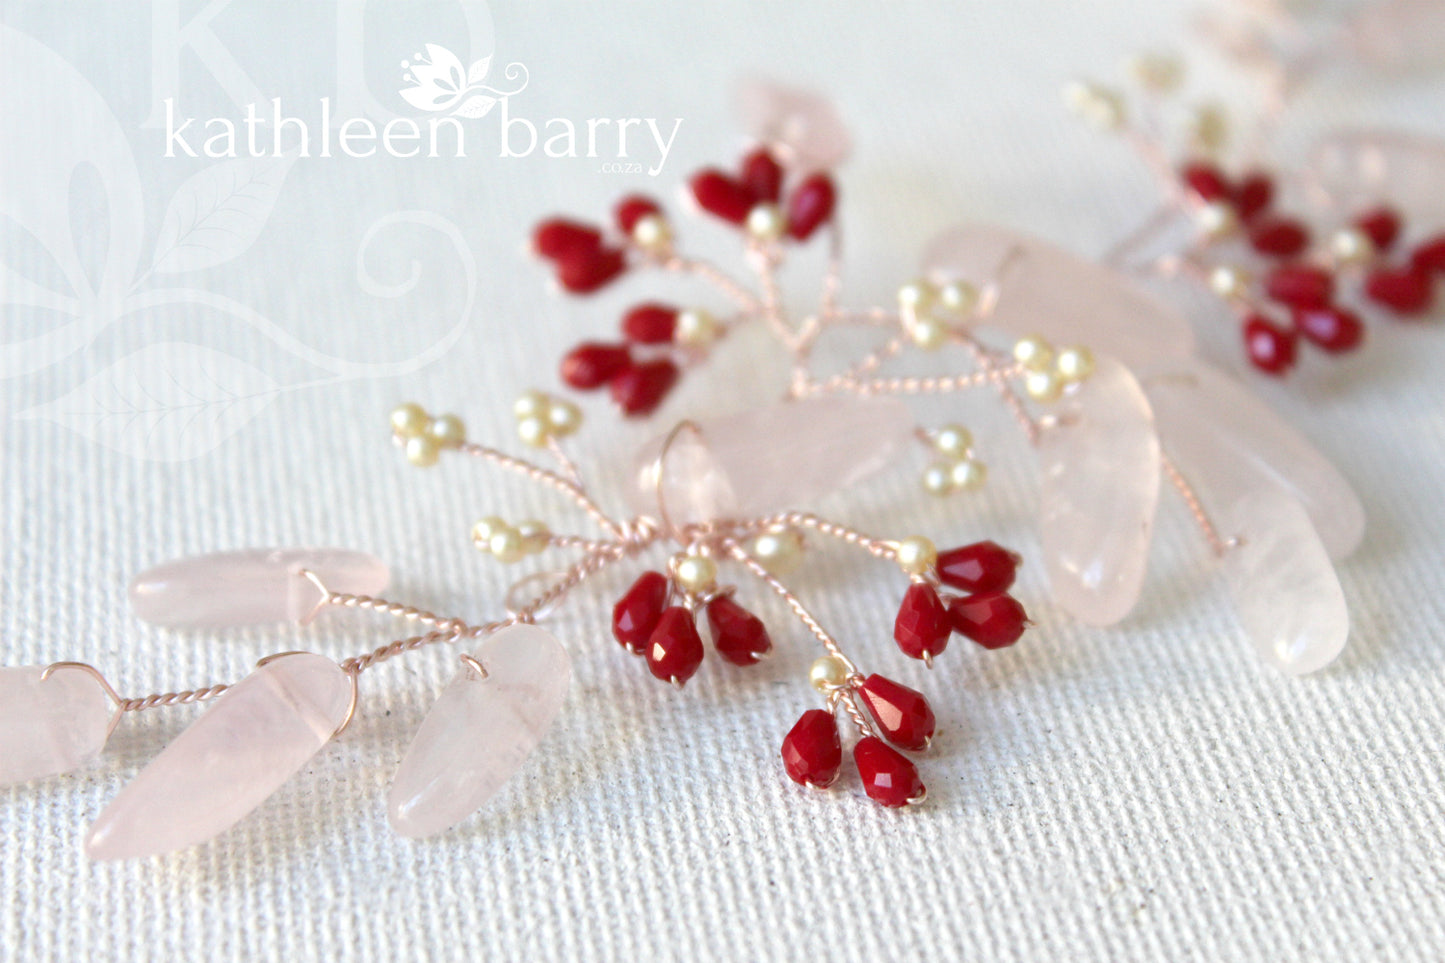 Aratani rose quartz hairpiece - two styles available (sold individually)